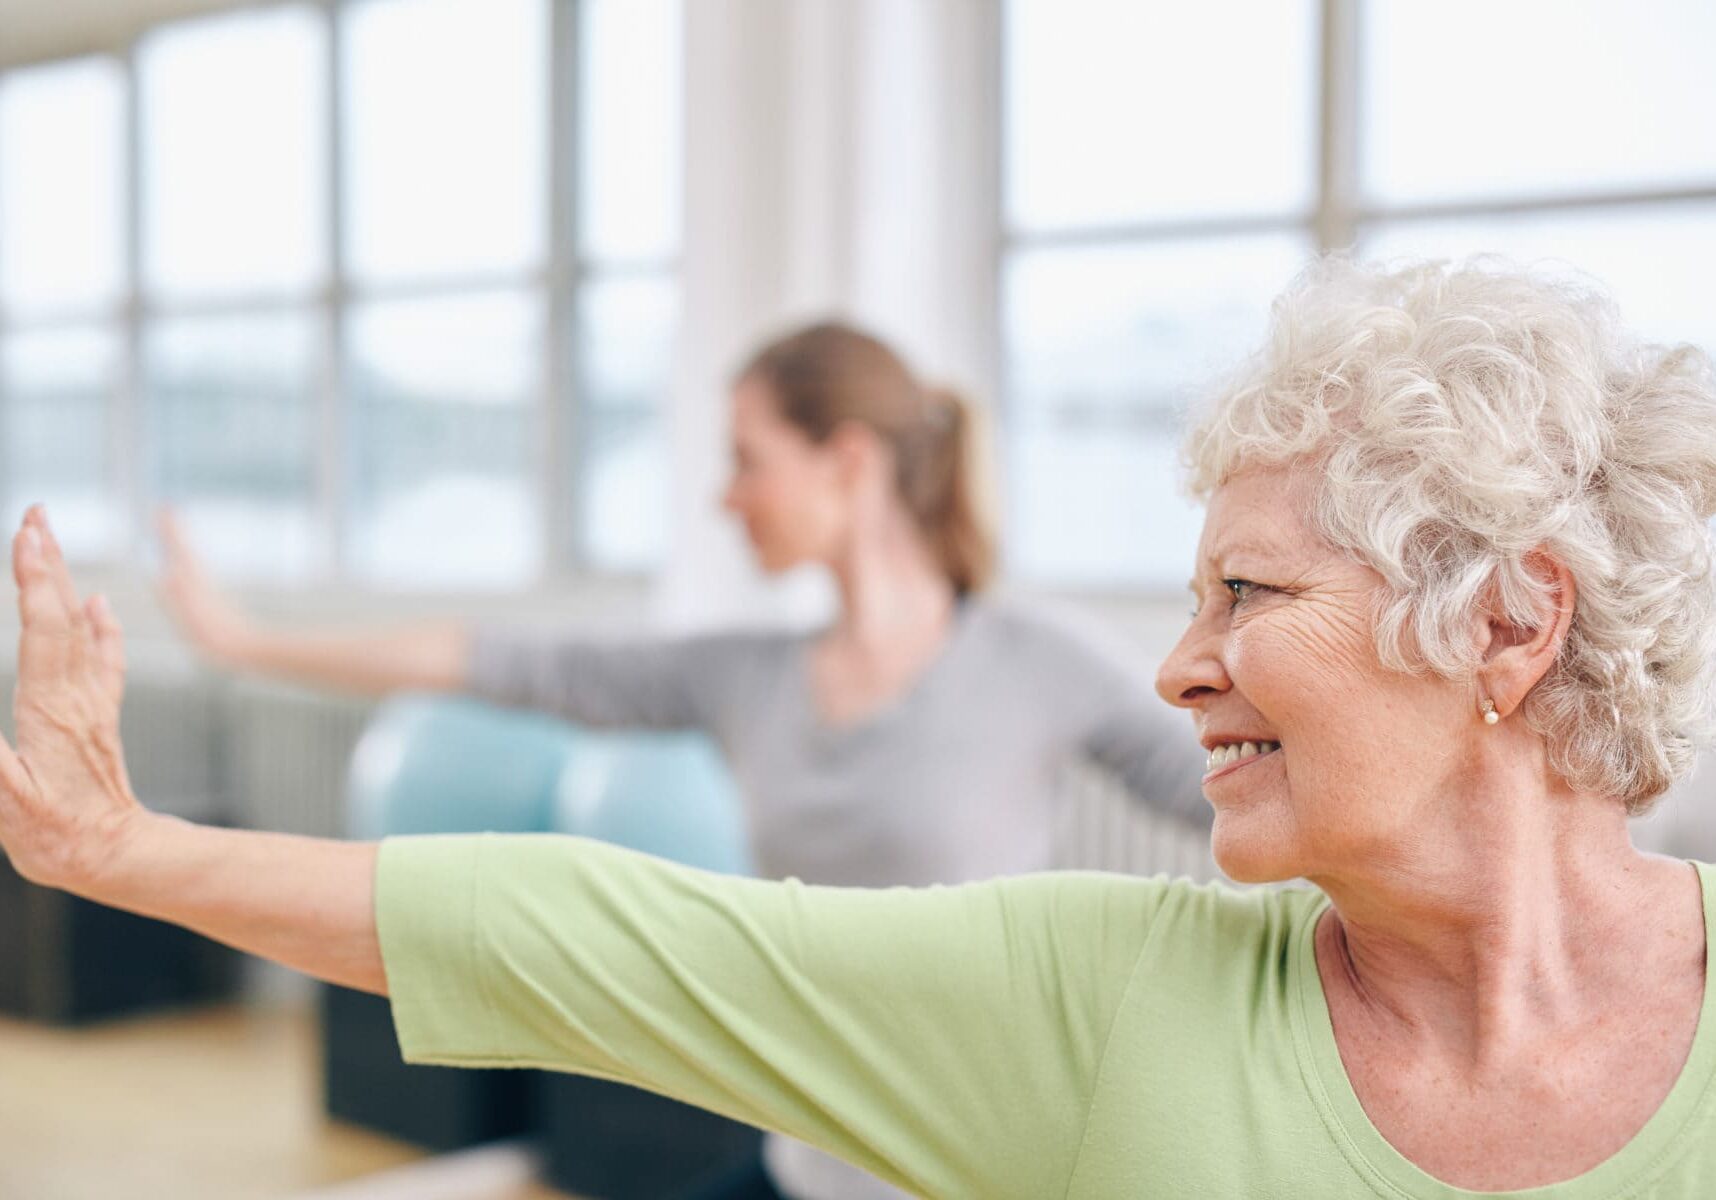 Close-up shot of elderly woman doing stretching workout at yoga class. Women practicing yoga at health club.